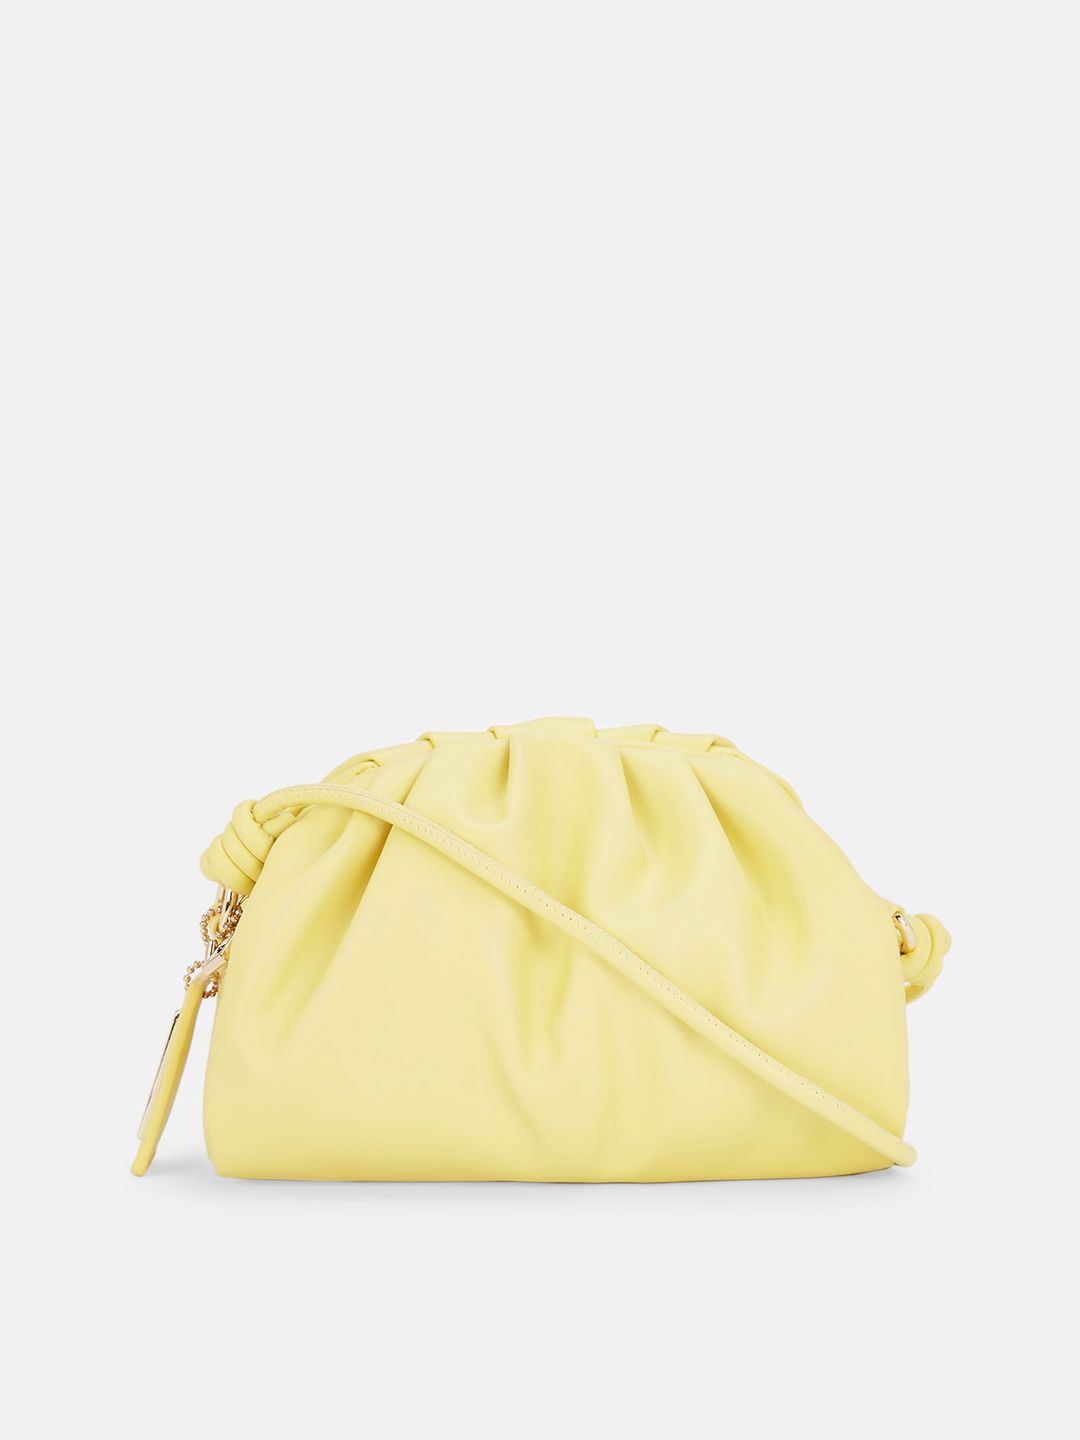 Forever Glam by Pantaloons Yellow Structured Sling Bag Price in India